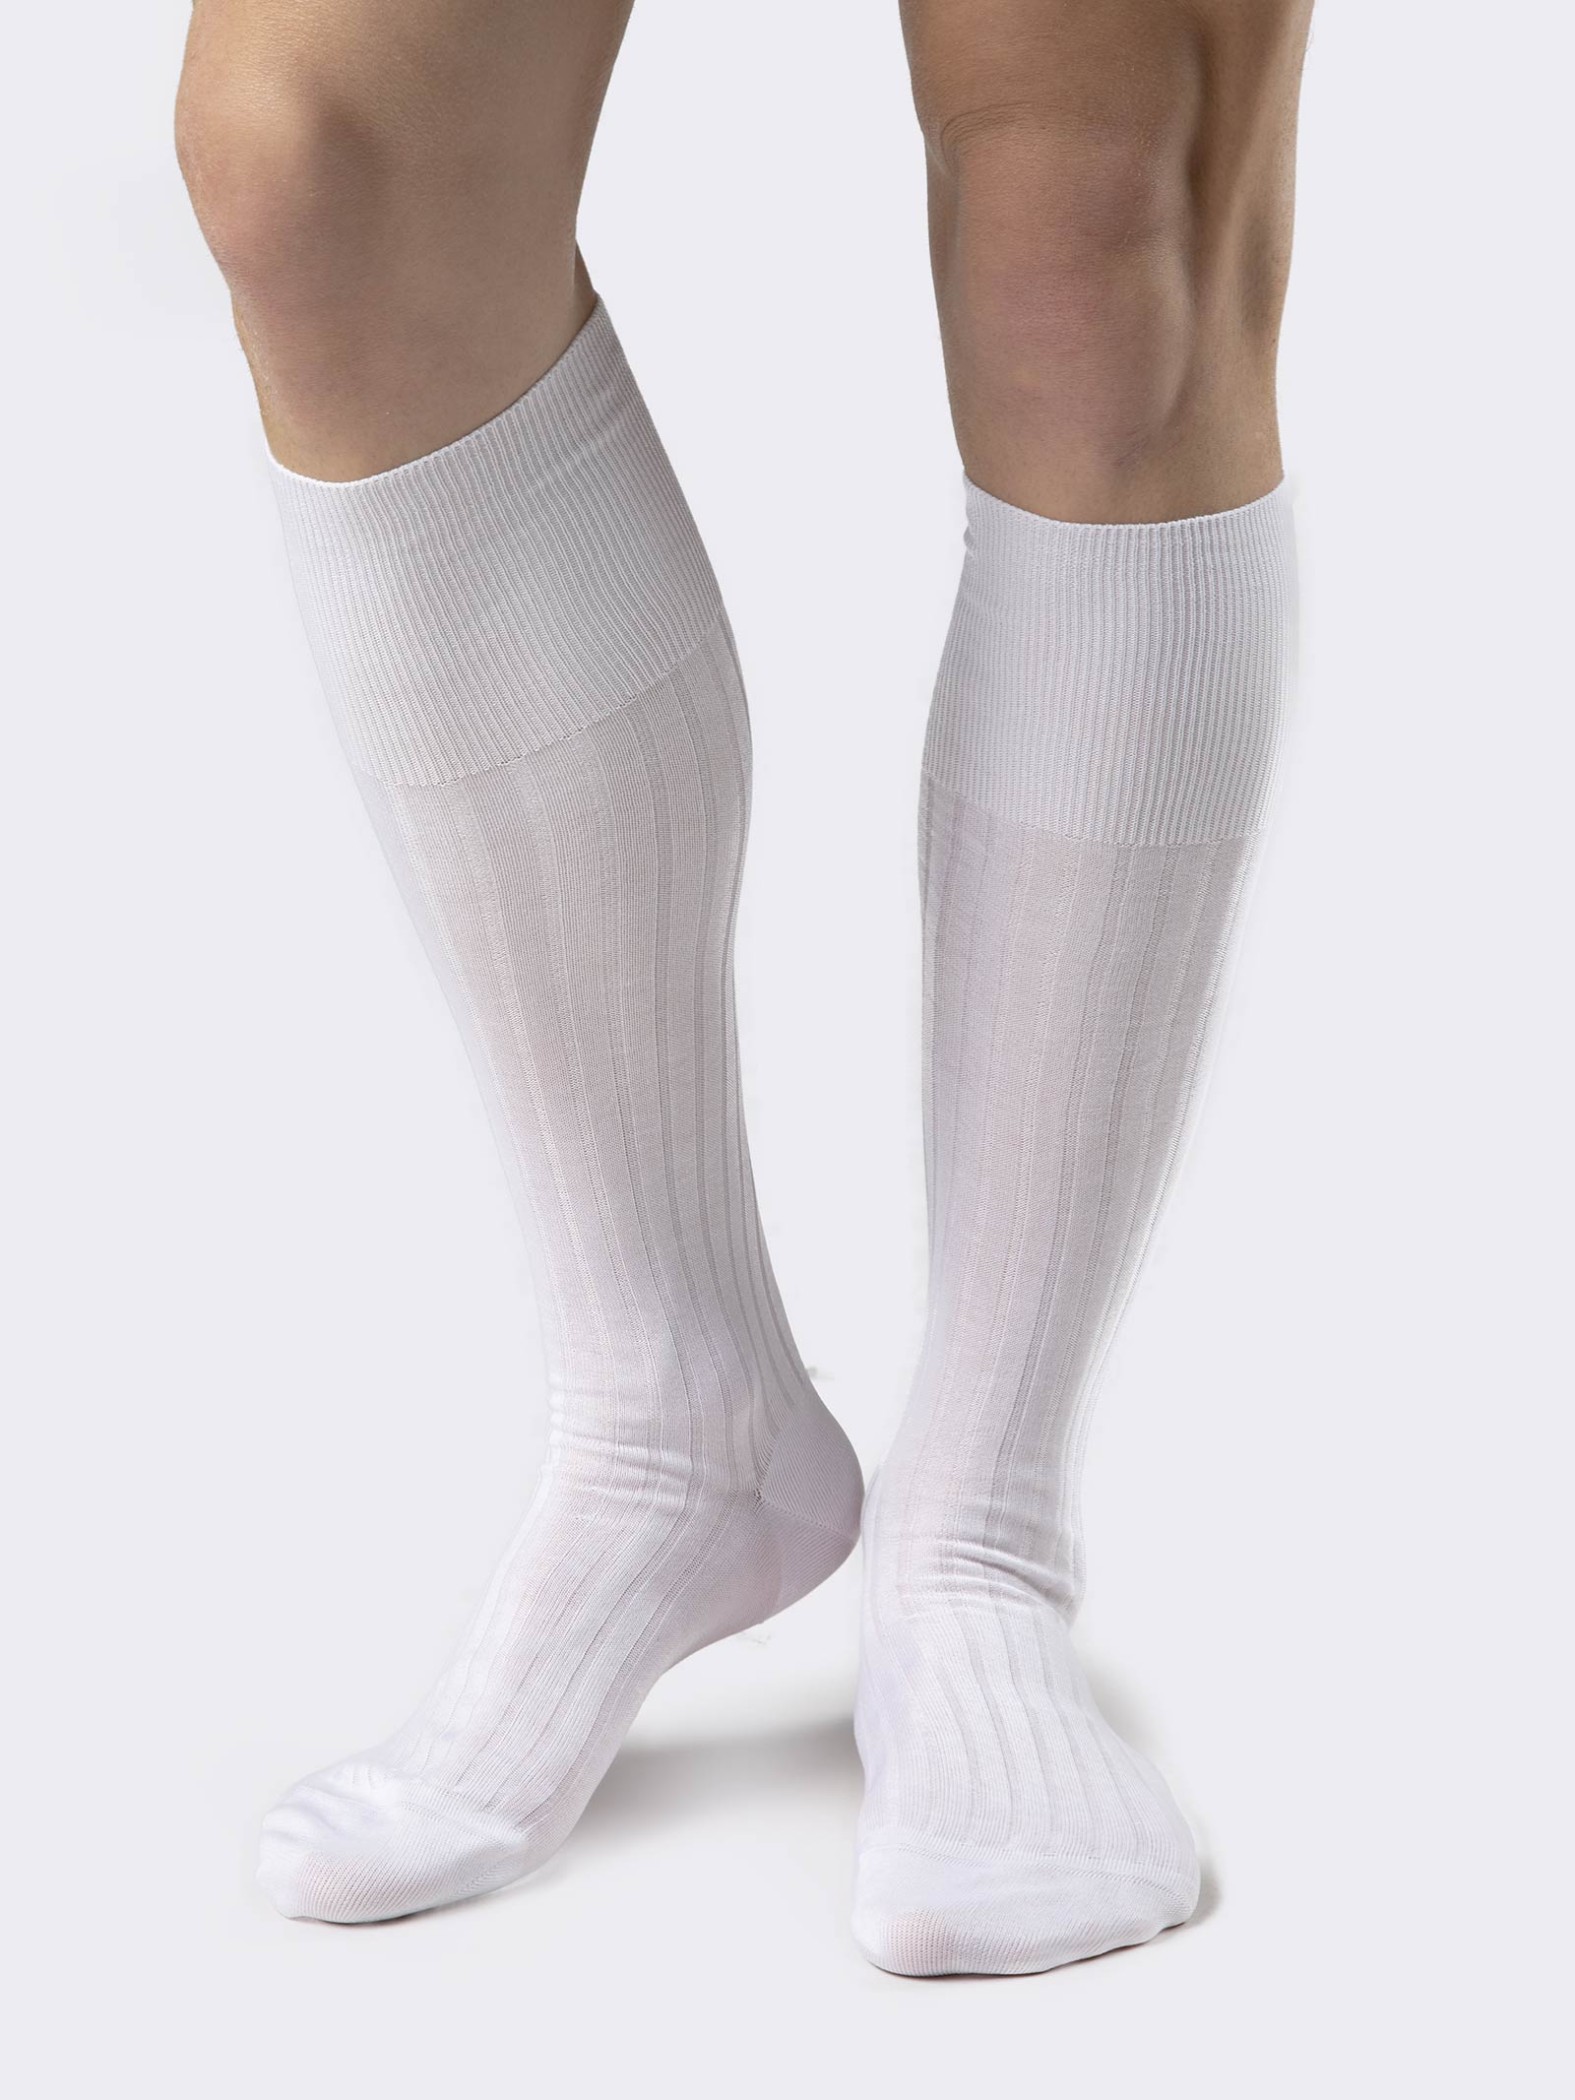 Sanitary long lisle socks without elastic - Made in Italy